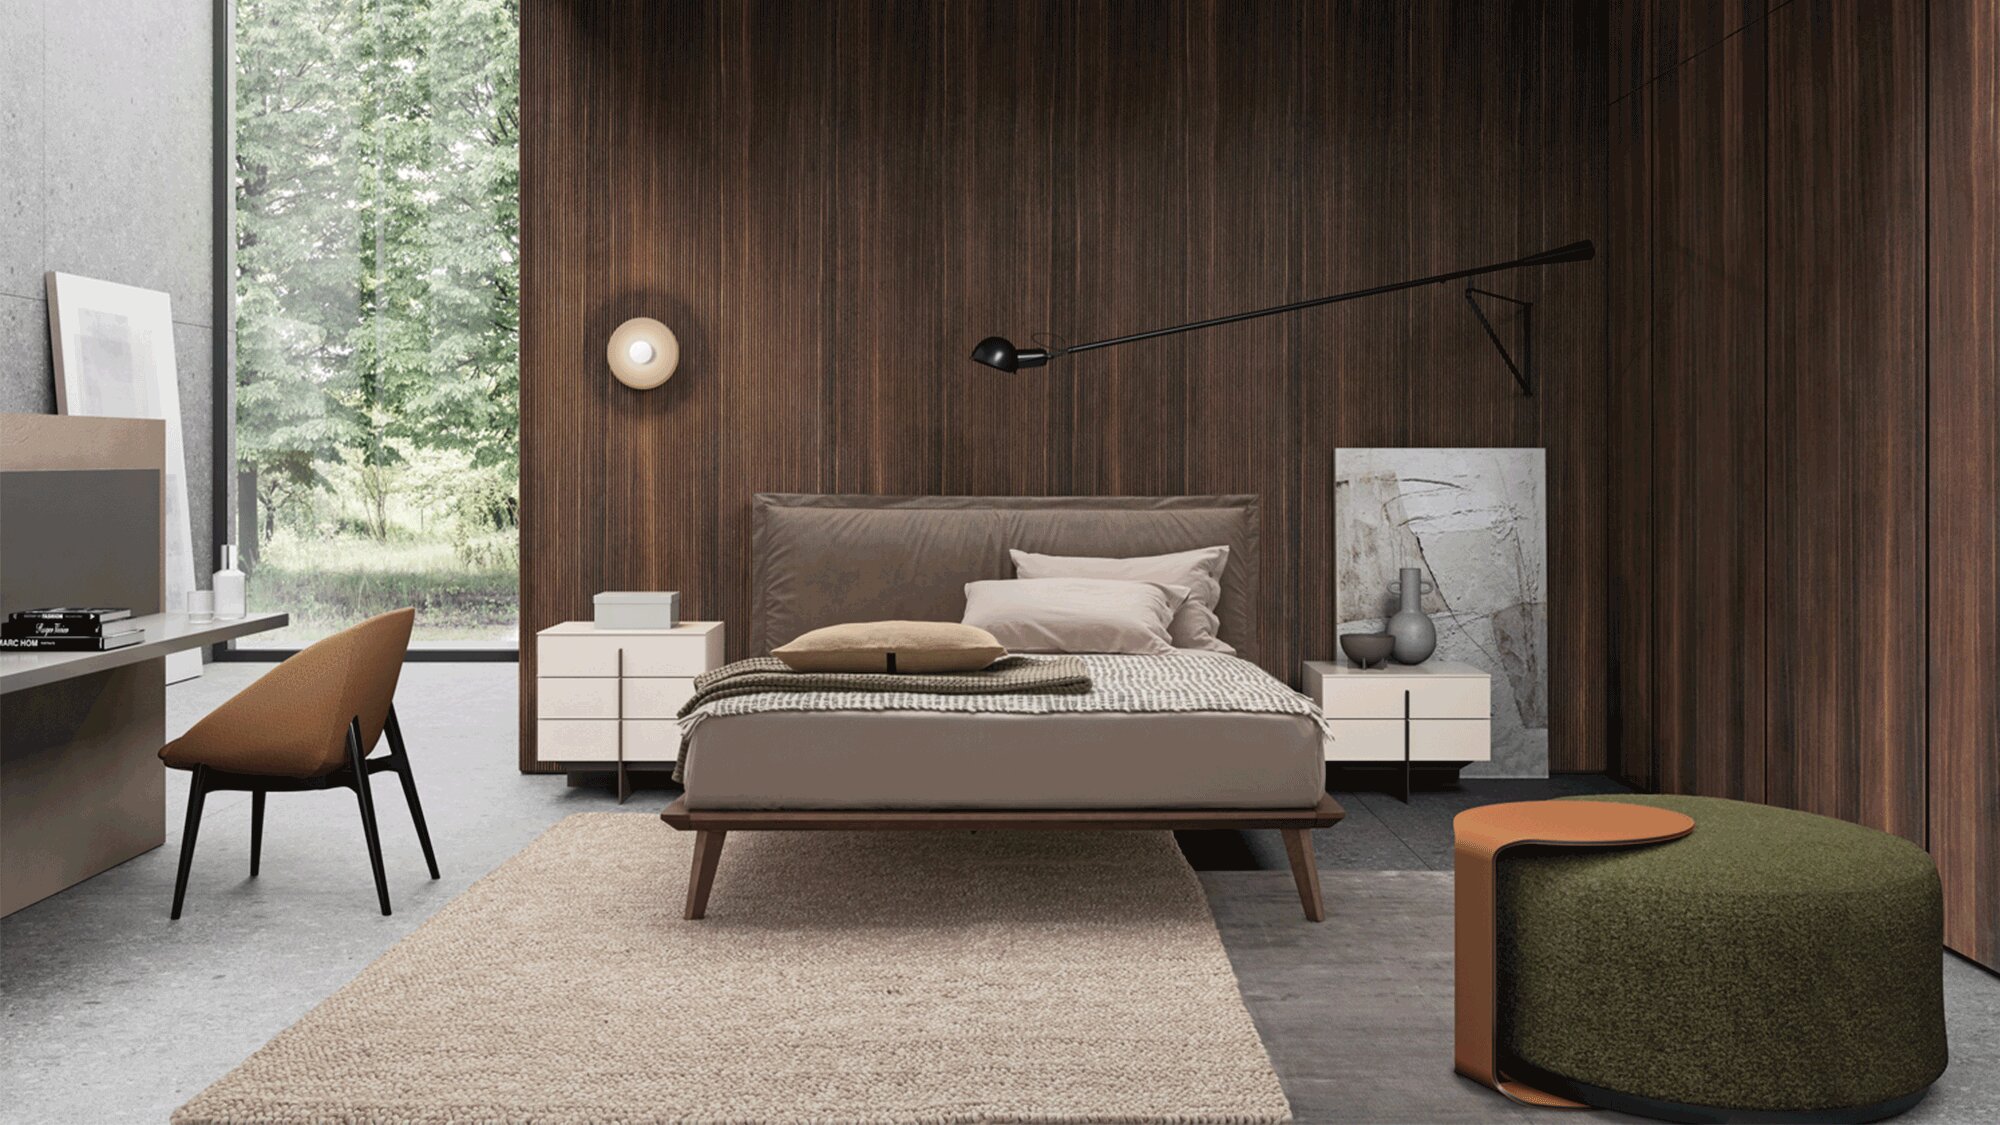 Bedroom with Morgan bed, Katana nightstands, Besu pouf and Le Mans armchair | Dallagnese